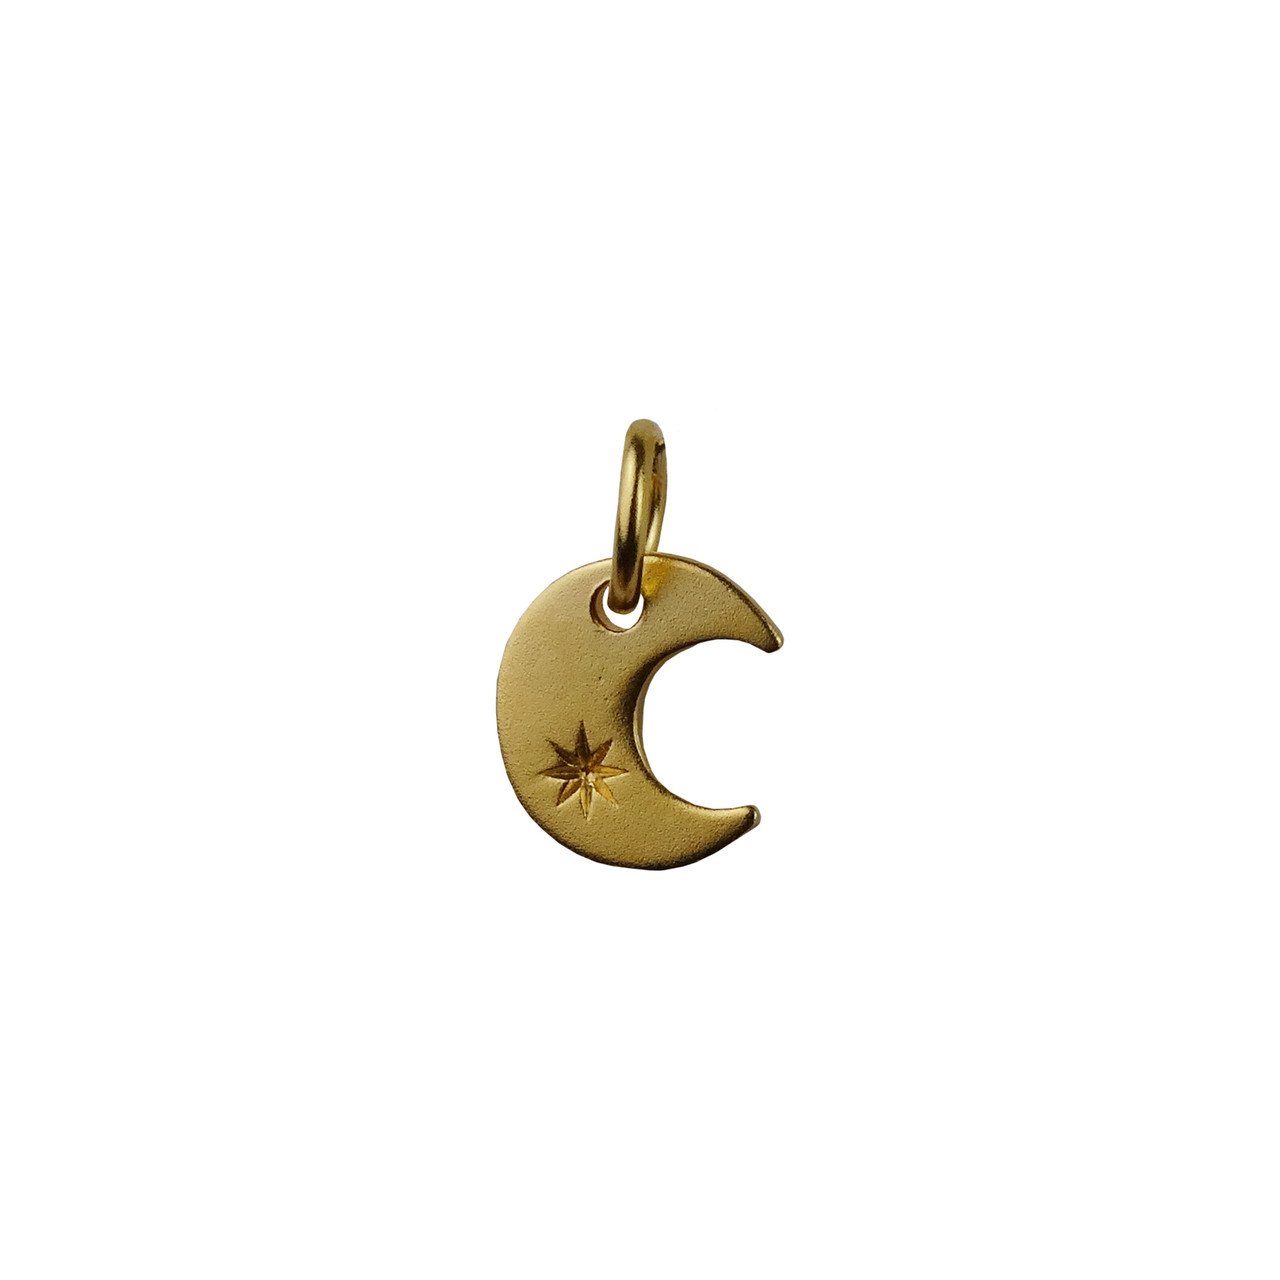 Gold Charms - Medium Clover Charm with 24K Gold Plate